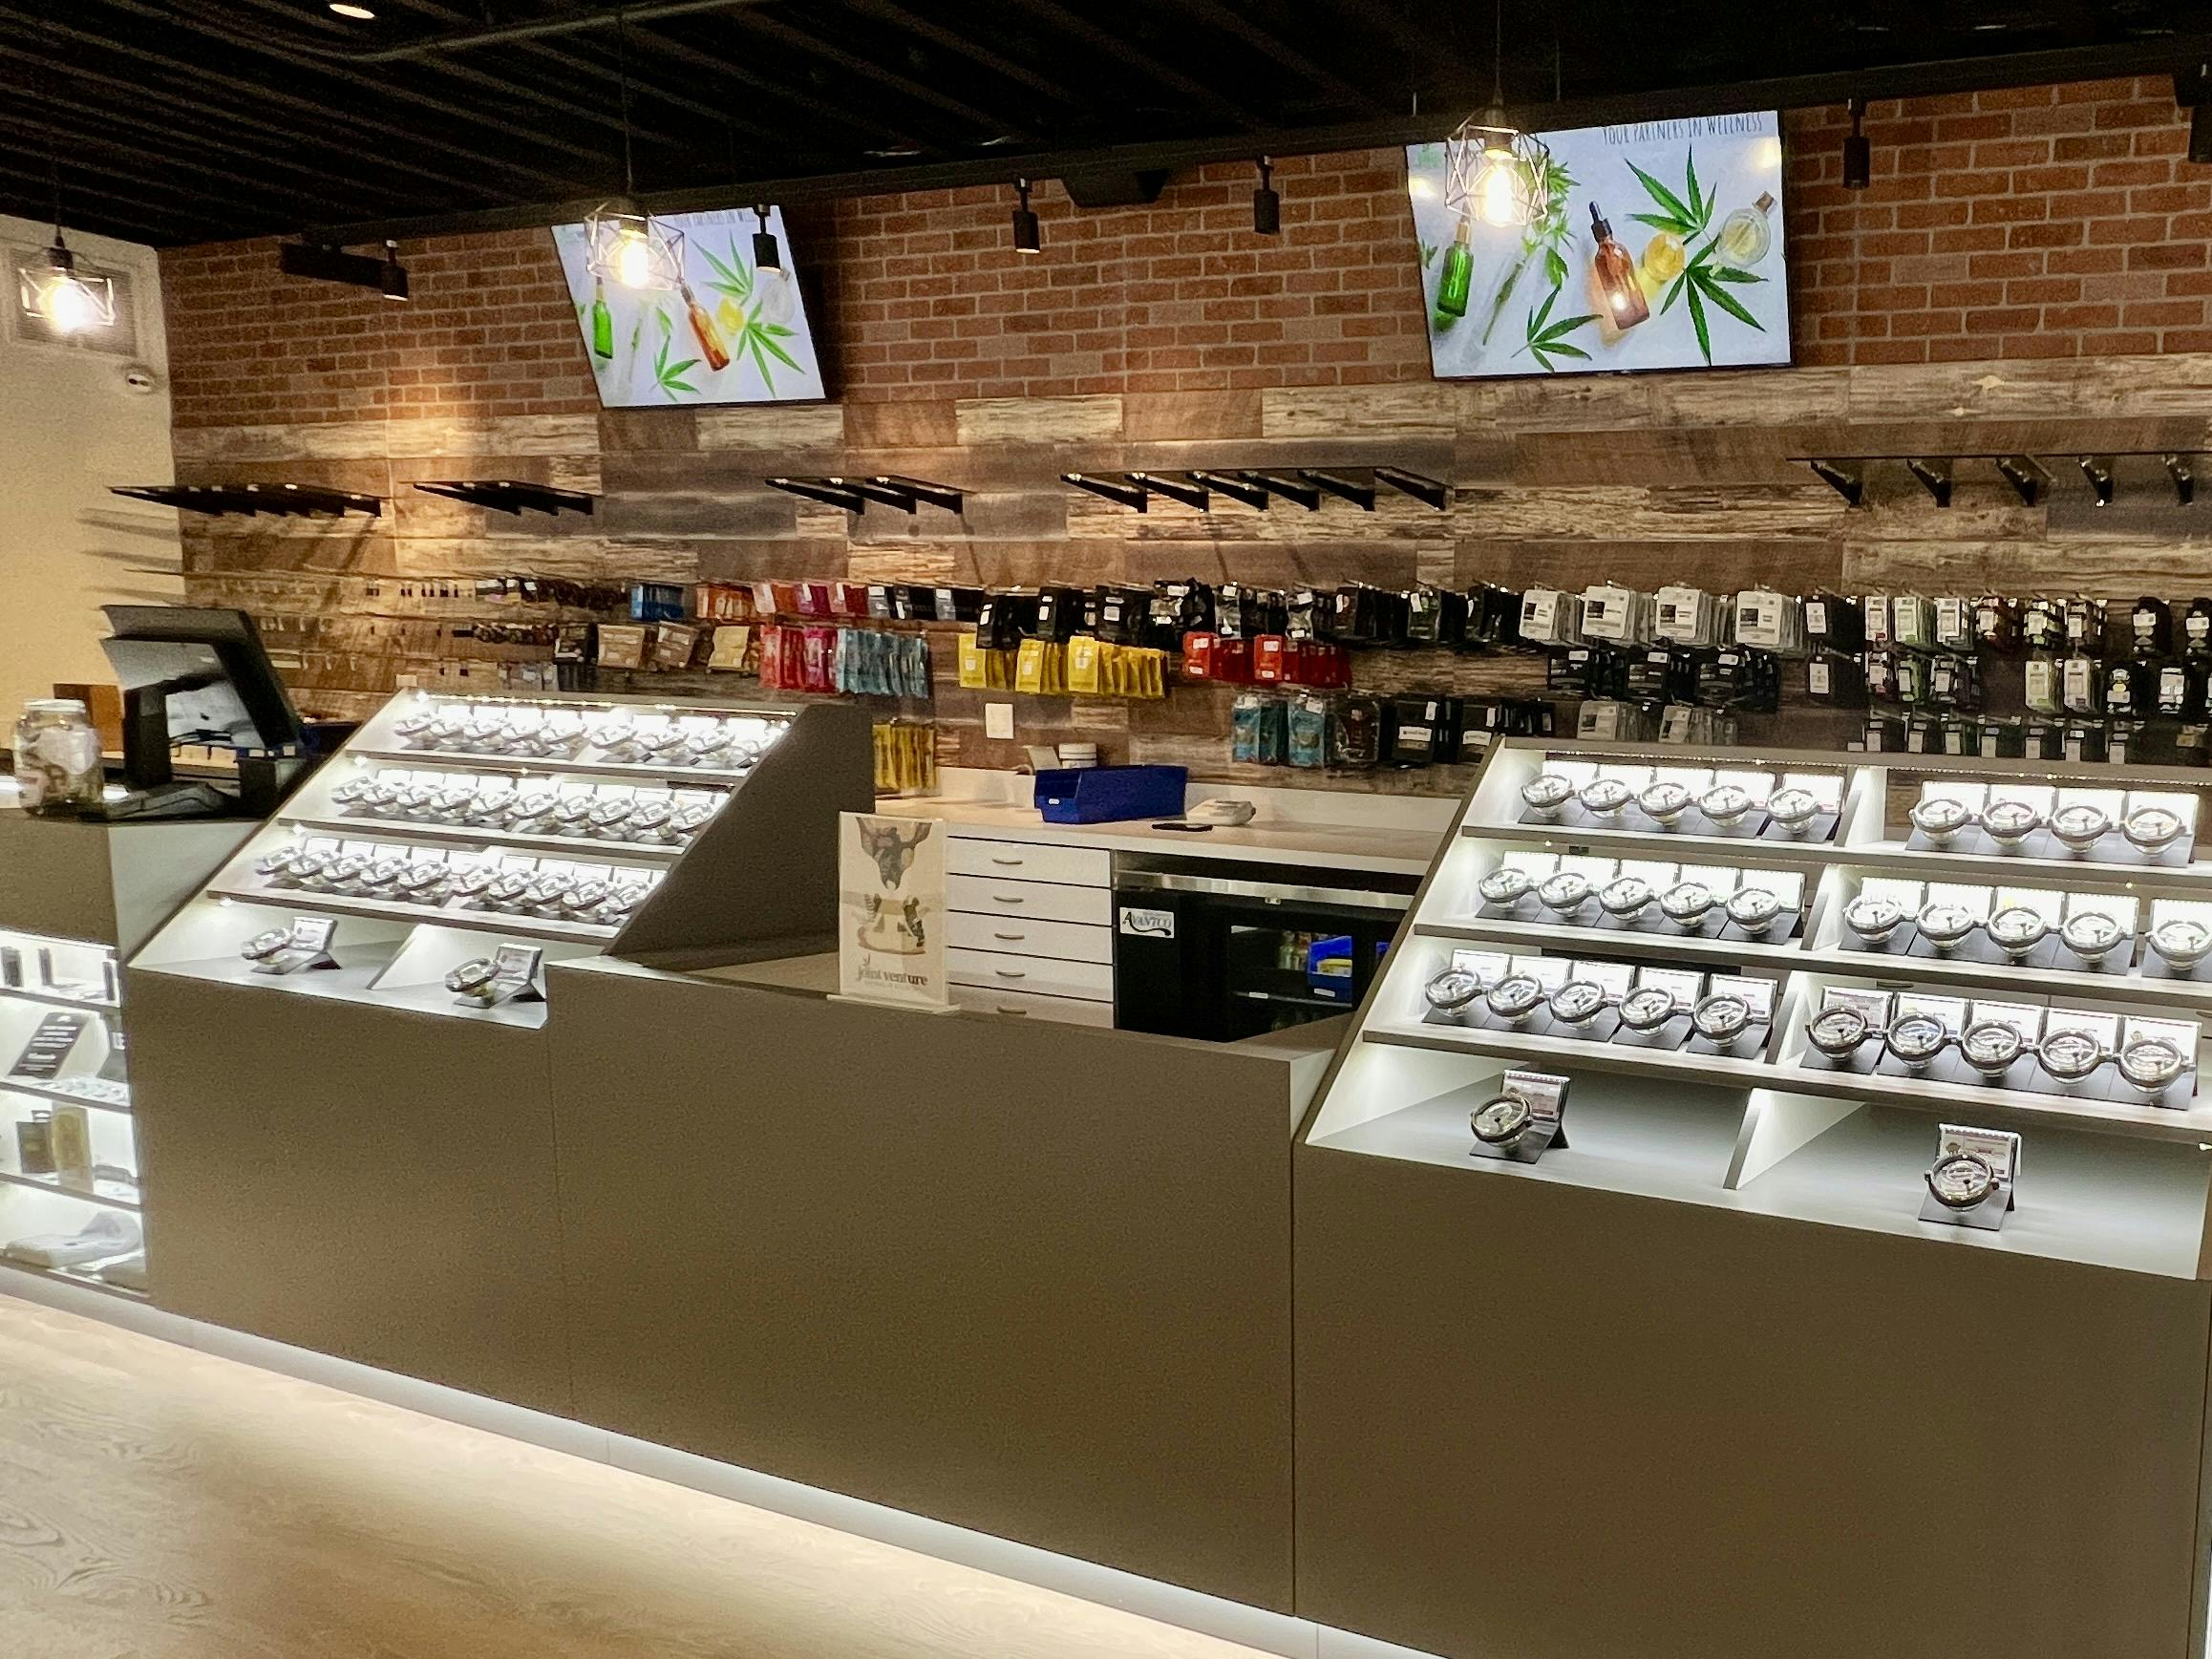 An interior view of a dispensary with empty queues, bright lighting, and a clean, modern aesthetic, displaying products in glass cases and on wall shelves.